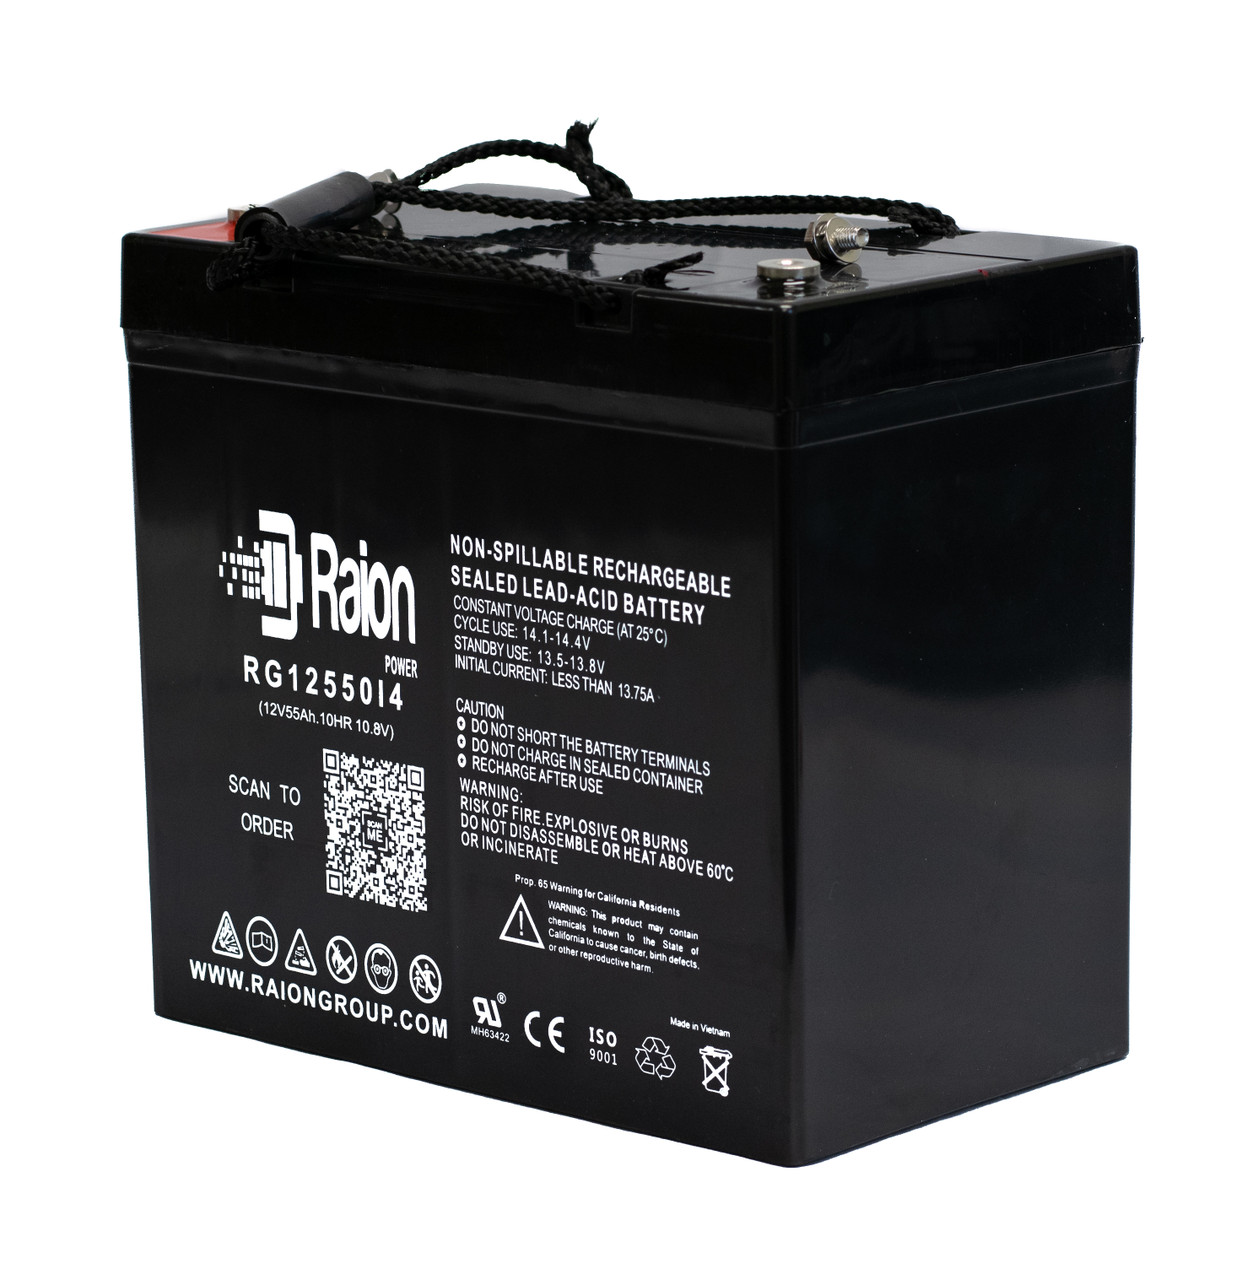 Raion Power Replacement 12V 55Ah Battery for Power Patrol SLA1160 - 1 Pack